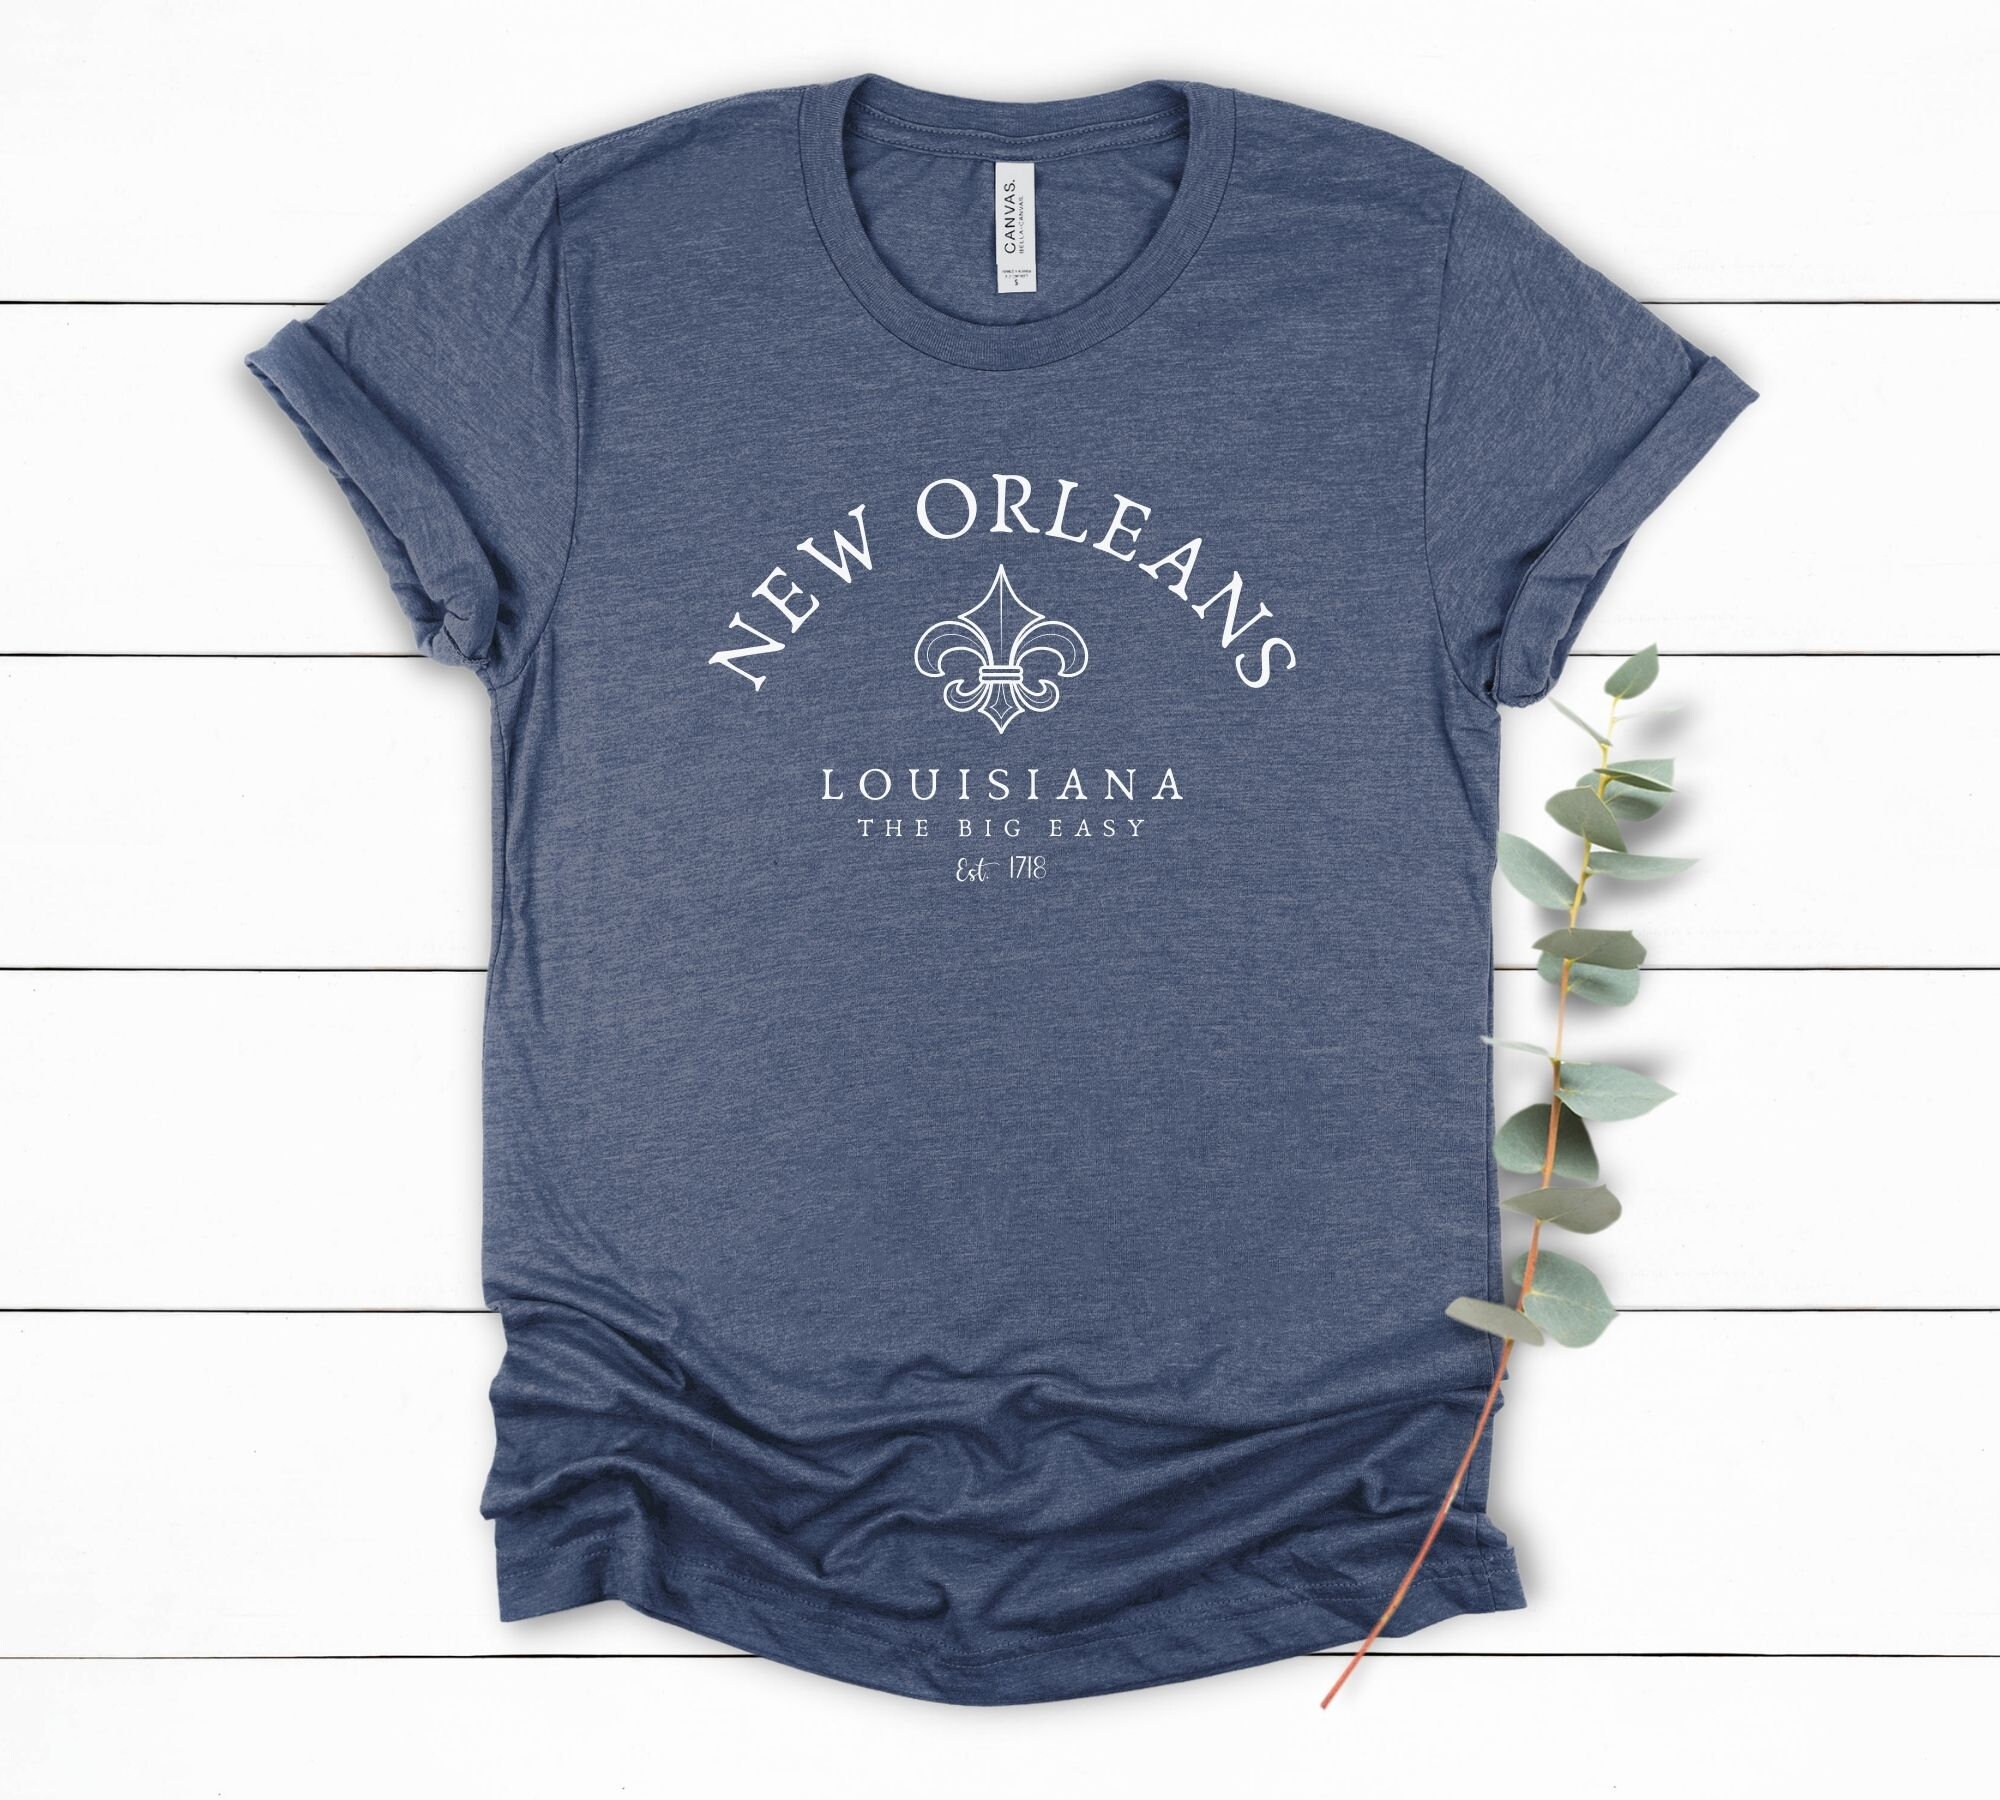 NOLA New Orleans The Big Easy Home! T-shirts Top